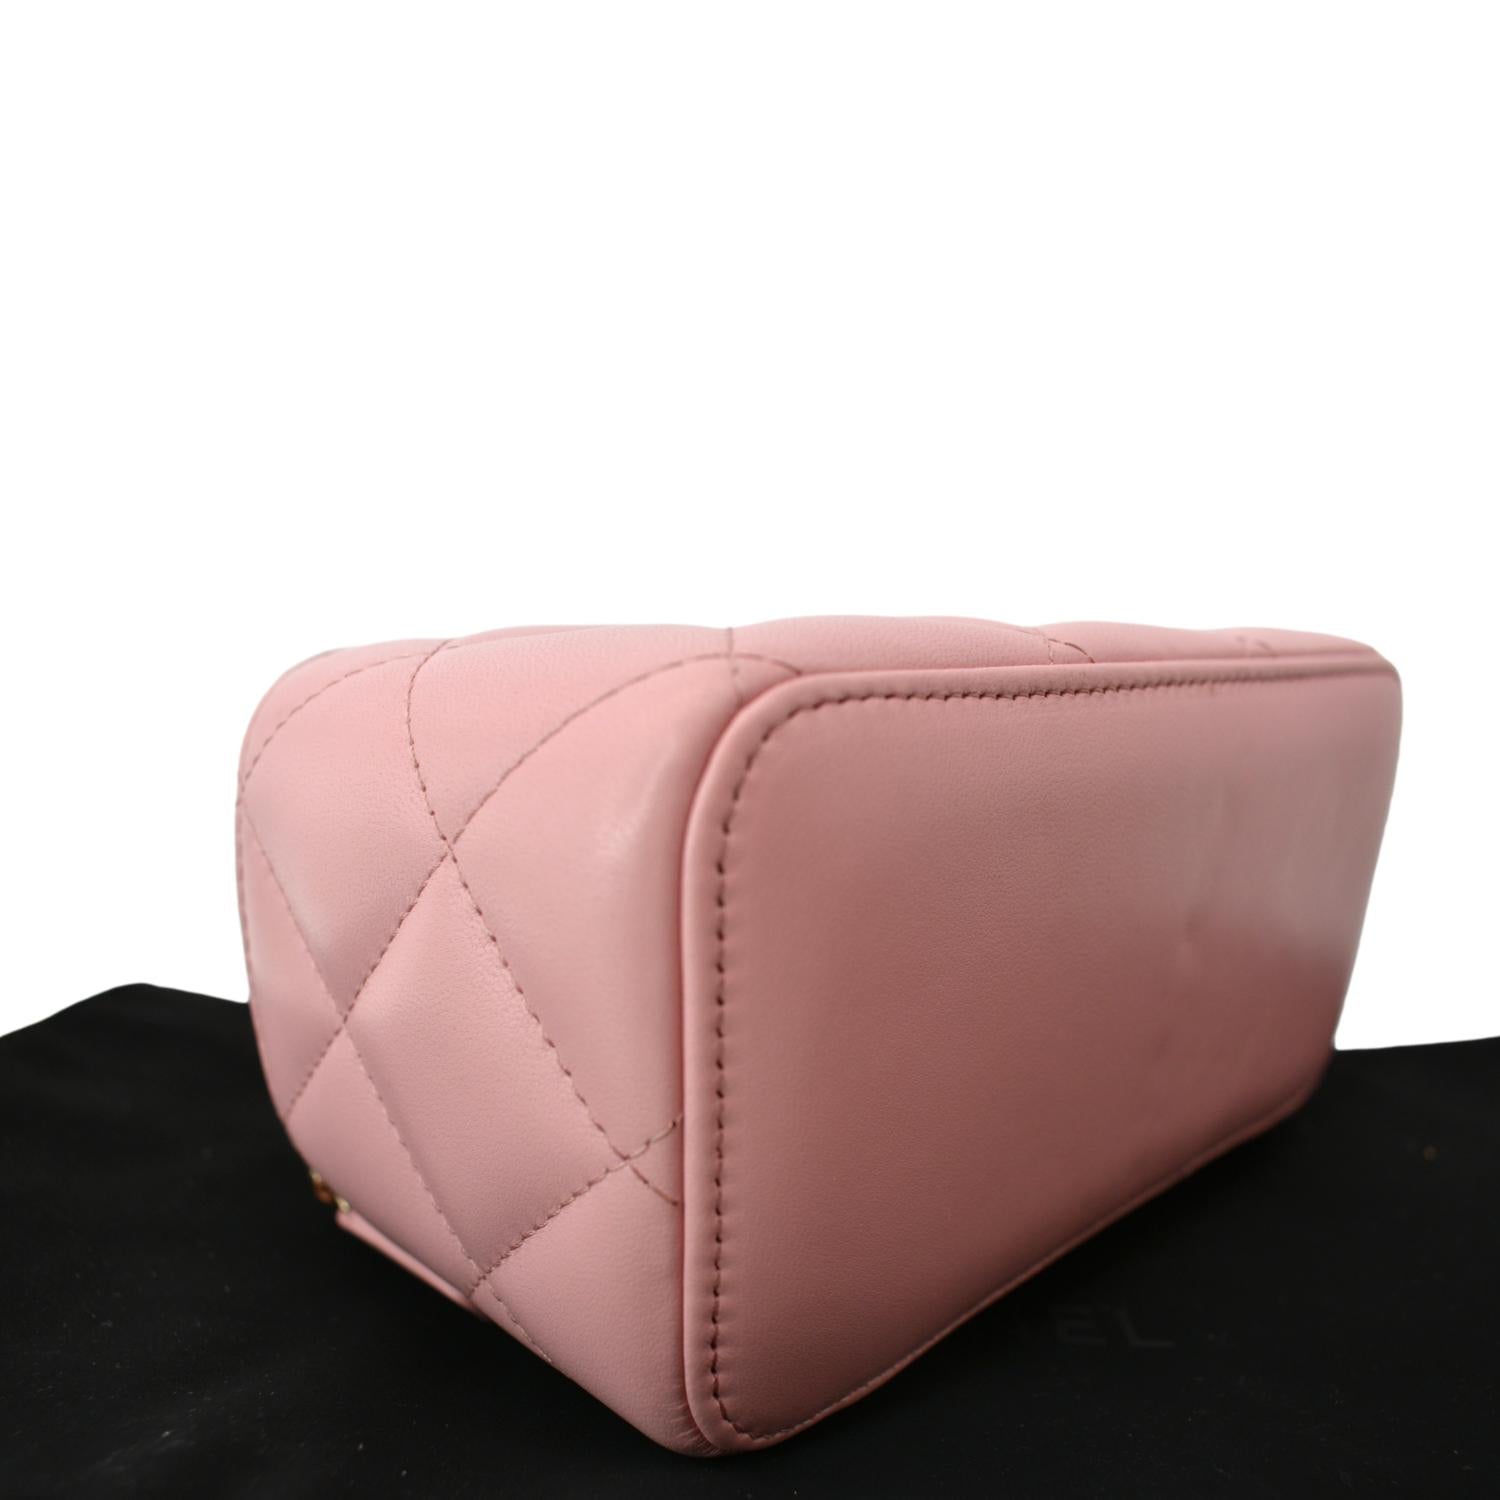 Pale Pink Quilted Bee Cross Body Bag